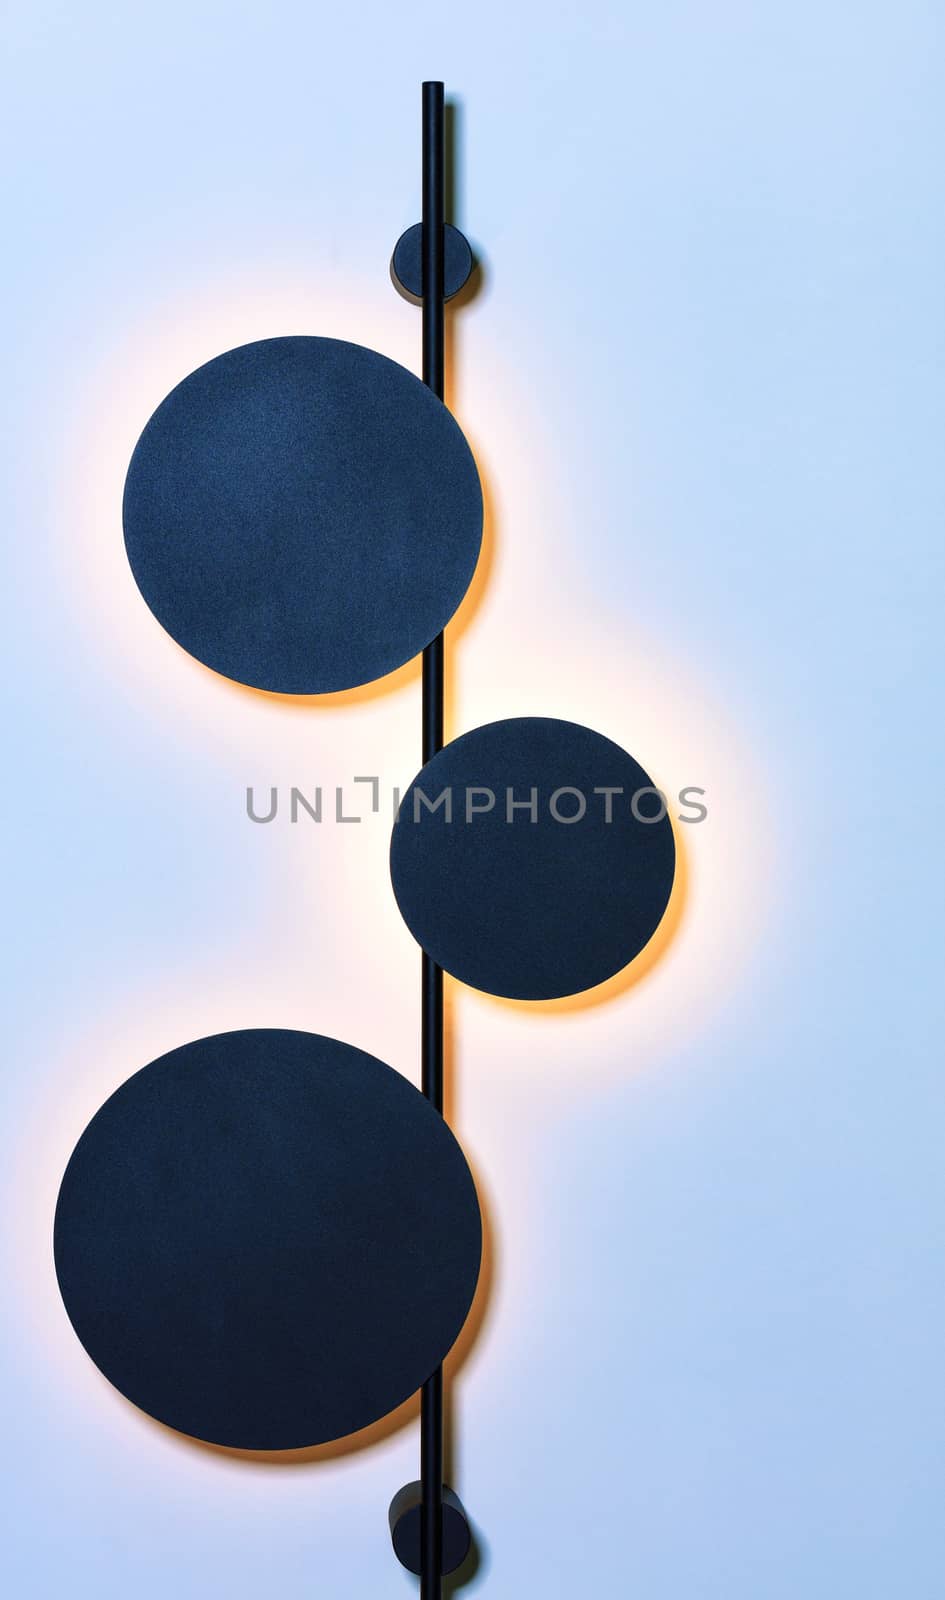 Stylish vertical metal wall lamp in the form of three celestial bodies in an eclipse against a blue wall makes soft warm lighting.